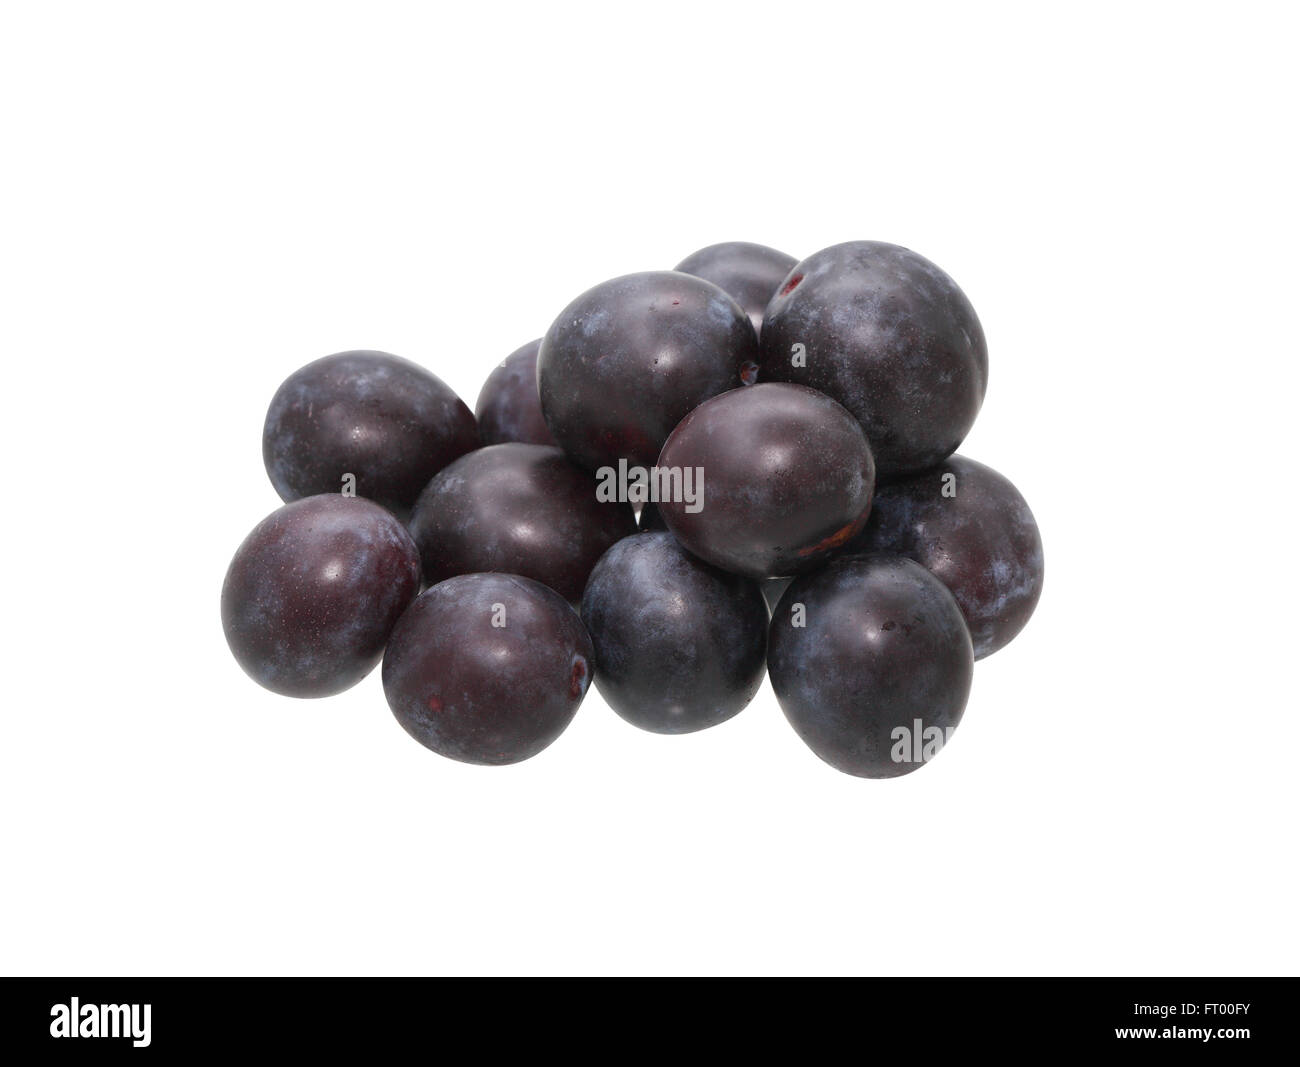 Heap of plum fruits on white background. Clipping path is included Stock Photo